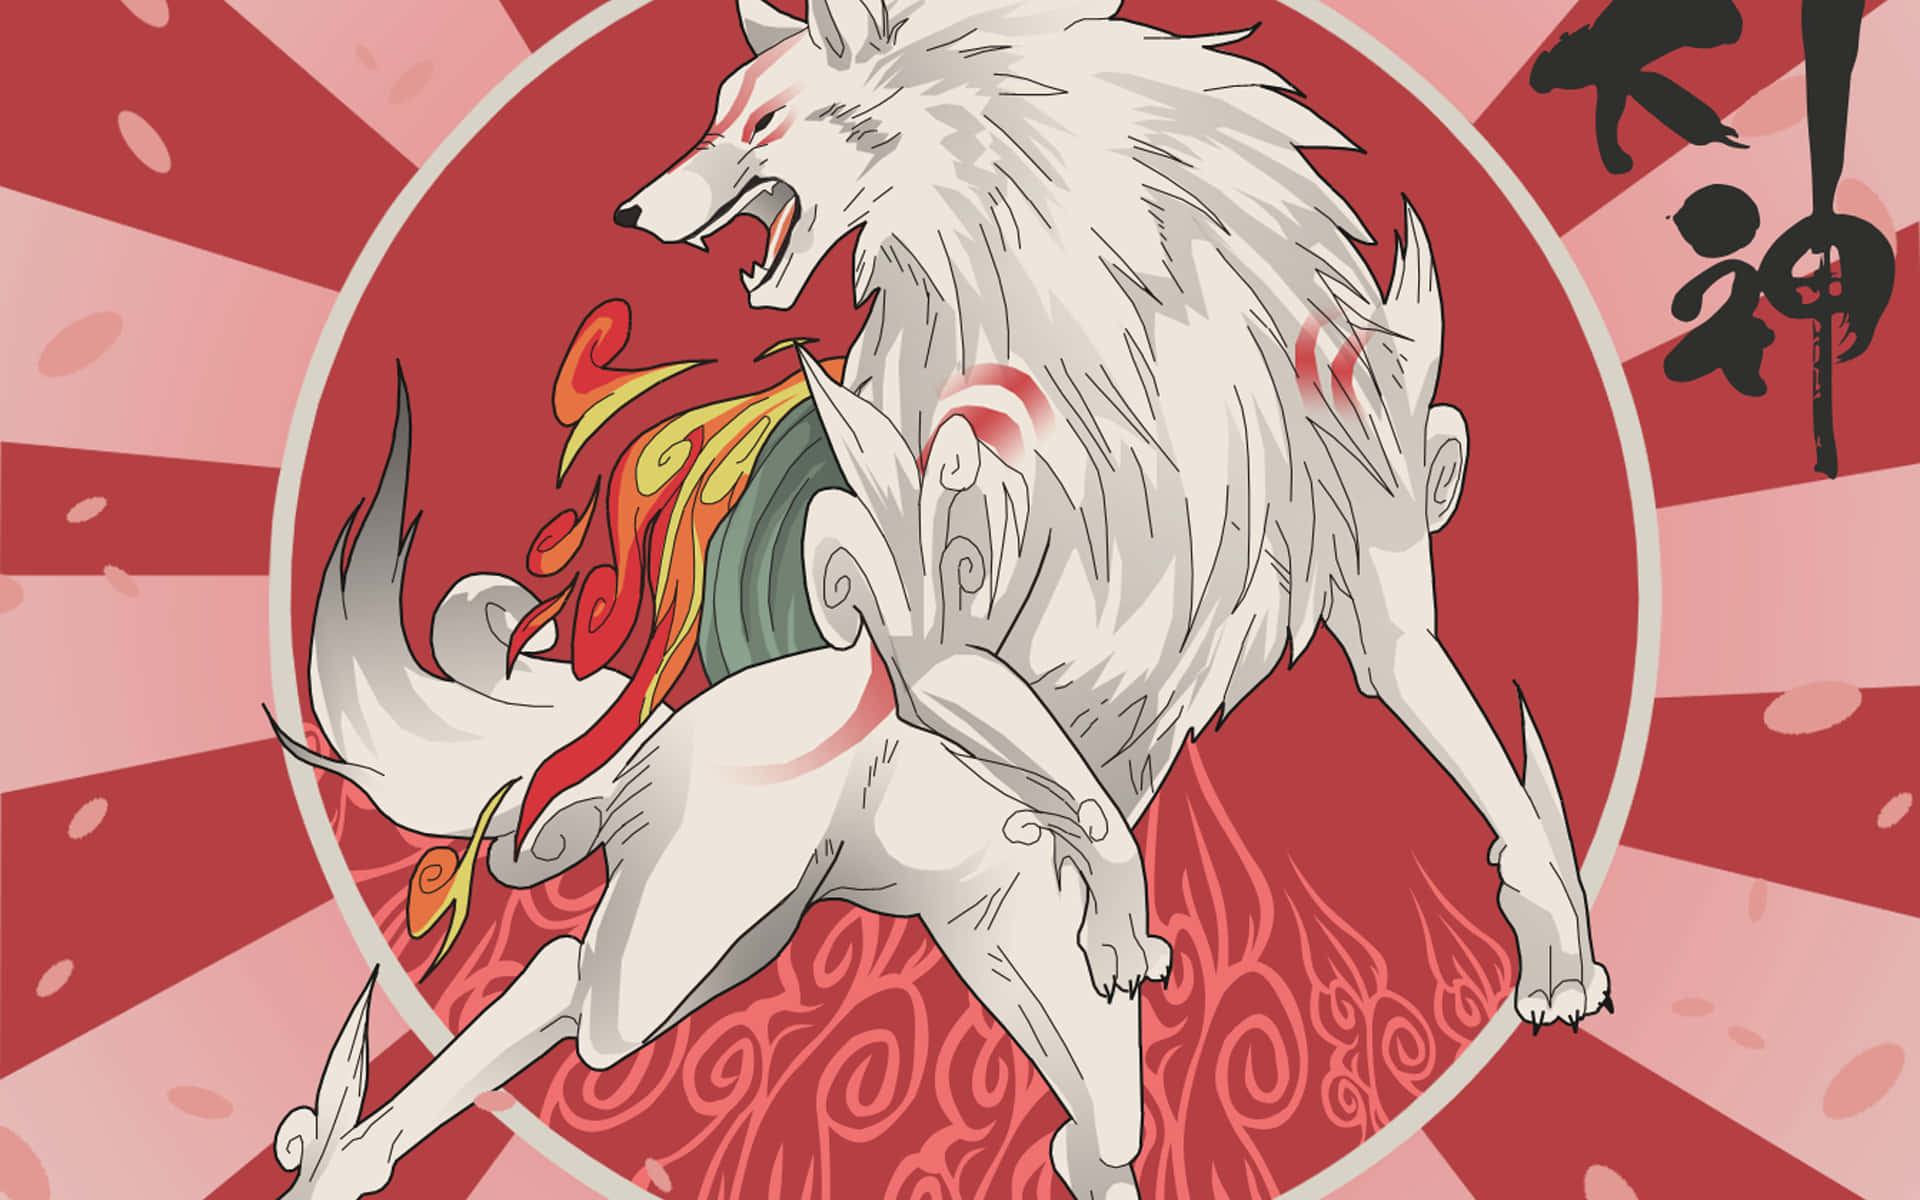 Join Amaterasu on her quest to restore beauty to Okami HD Wallpaper